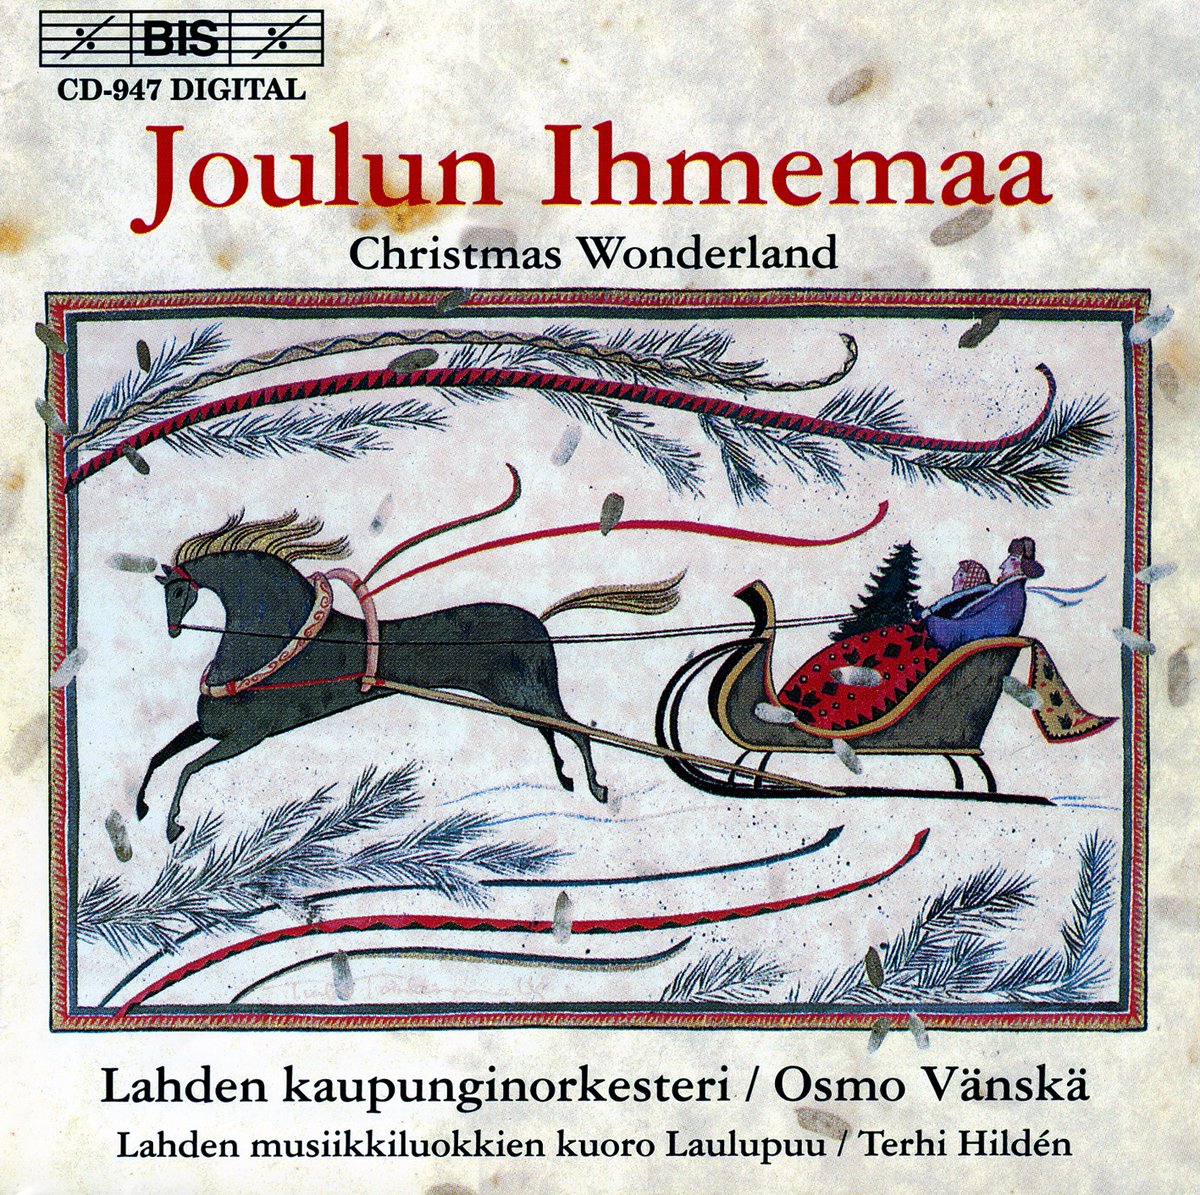 Today Scandinavia celebrates Lucia, or St. Lucy's Day, a traditional festival of light leading up to Christmas. In the same spirit, let @lahtisymphony and Osmo Vänskä brighten your day with traditional Finnish Christmas songs! Listen here: bisrecords.lnk.to/947 #ChristmasMusic